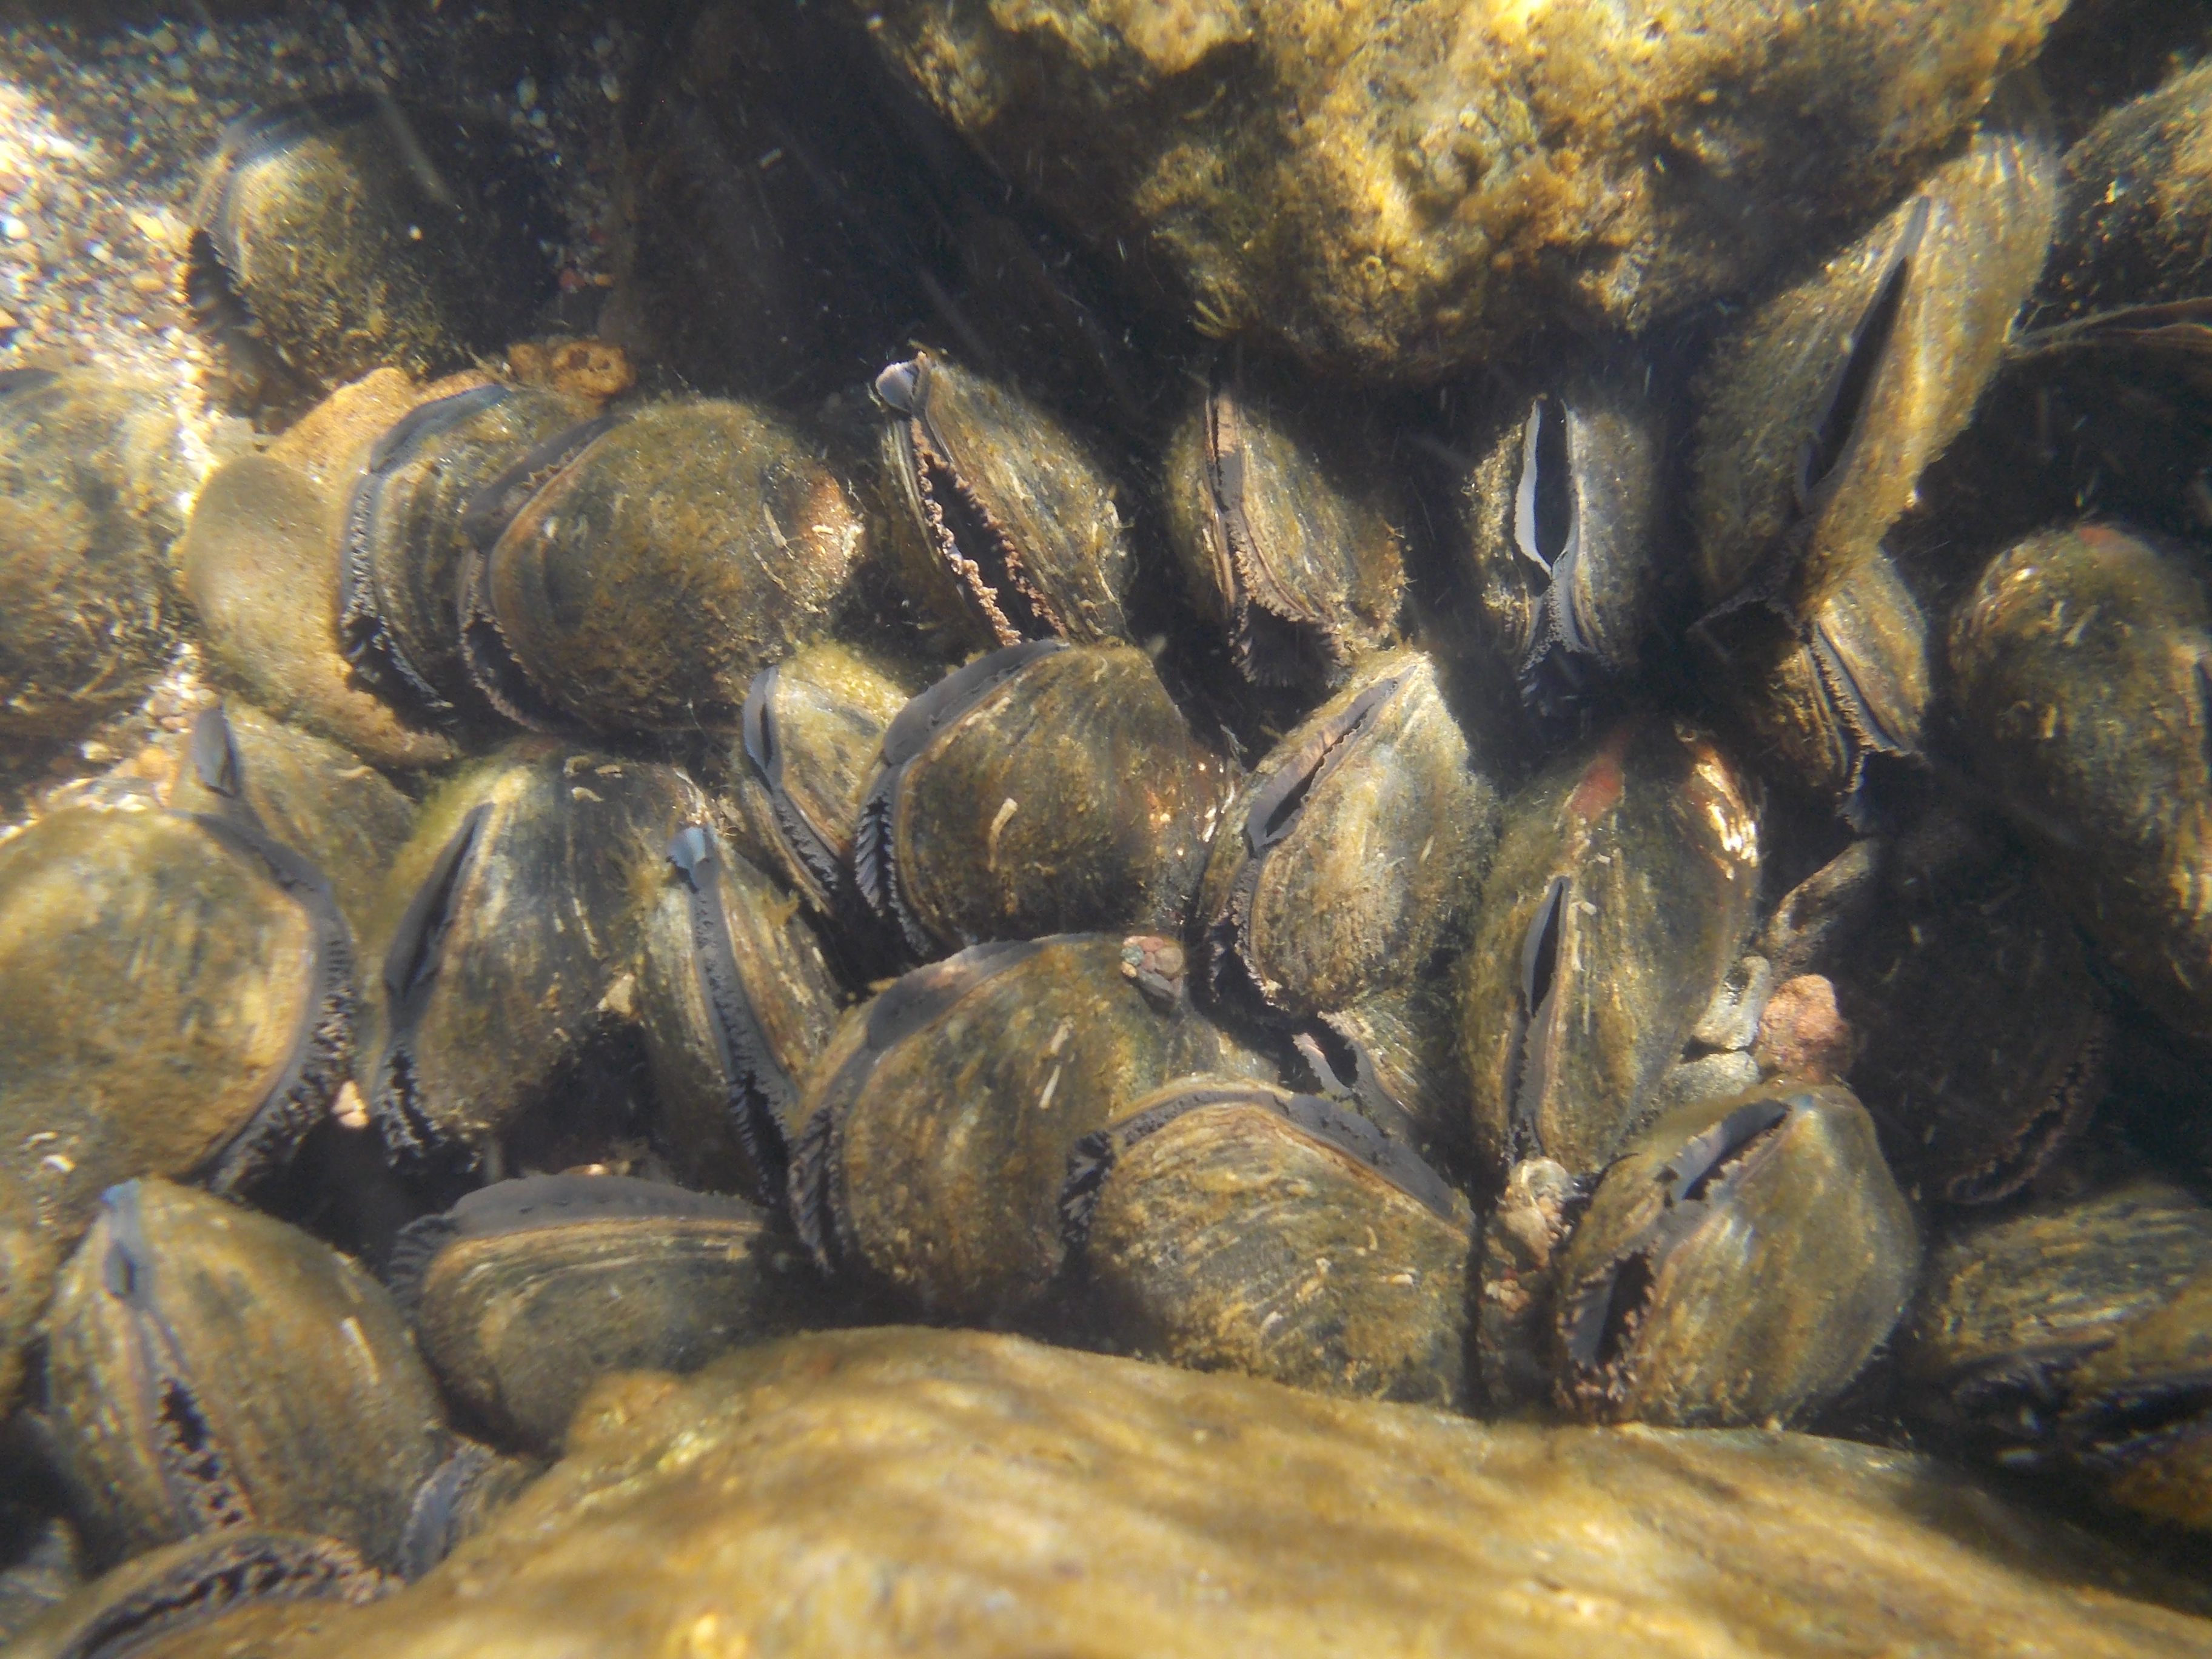 Western Pearlshell mussels in a massive bed near Tiller, OR